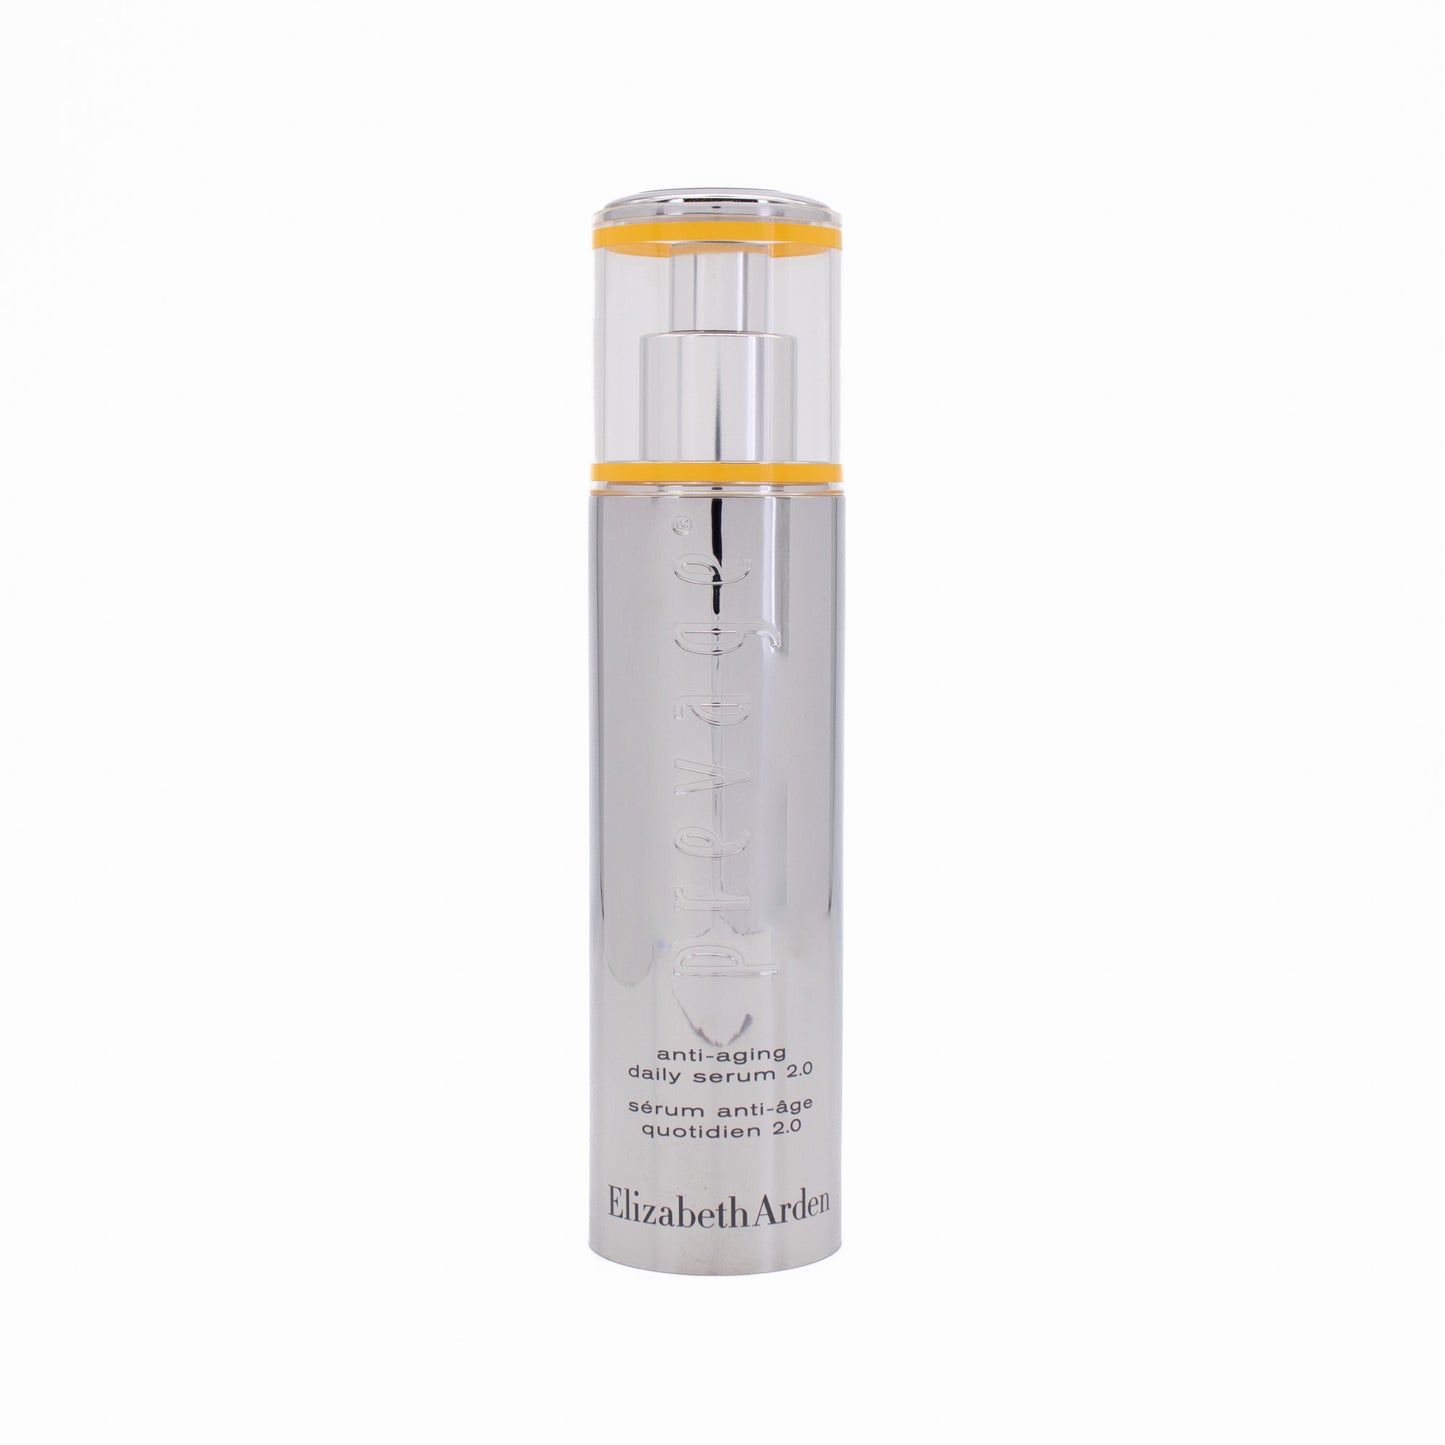 Elizabeth Arden Prevage Anti-Aging Daily Serum 2.0 50ml - Imperfect Box - This is Beauty UK